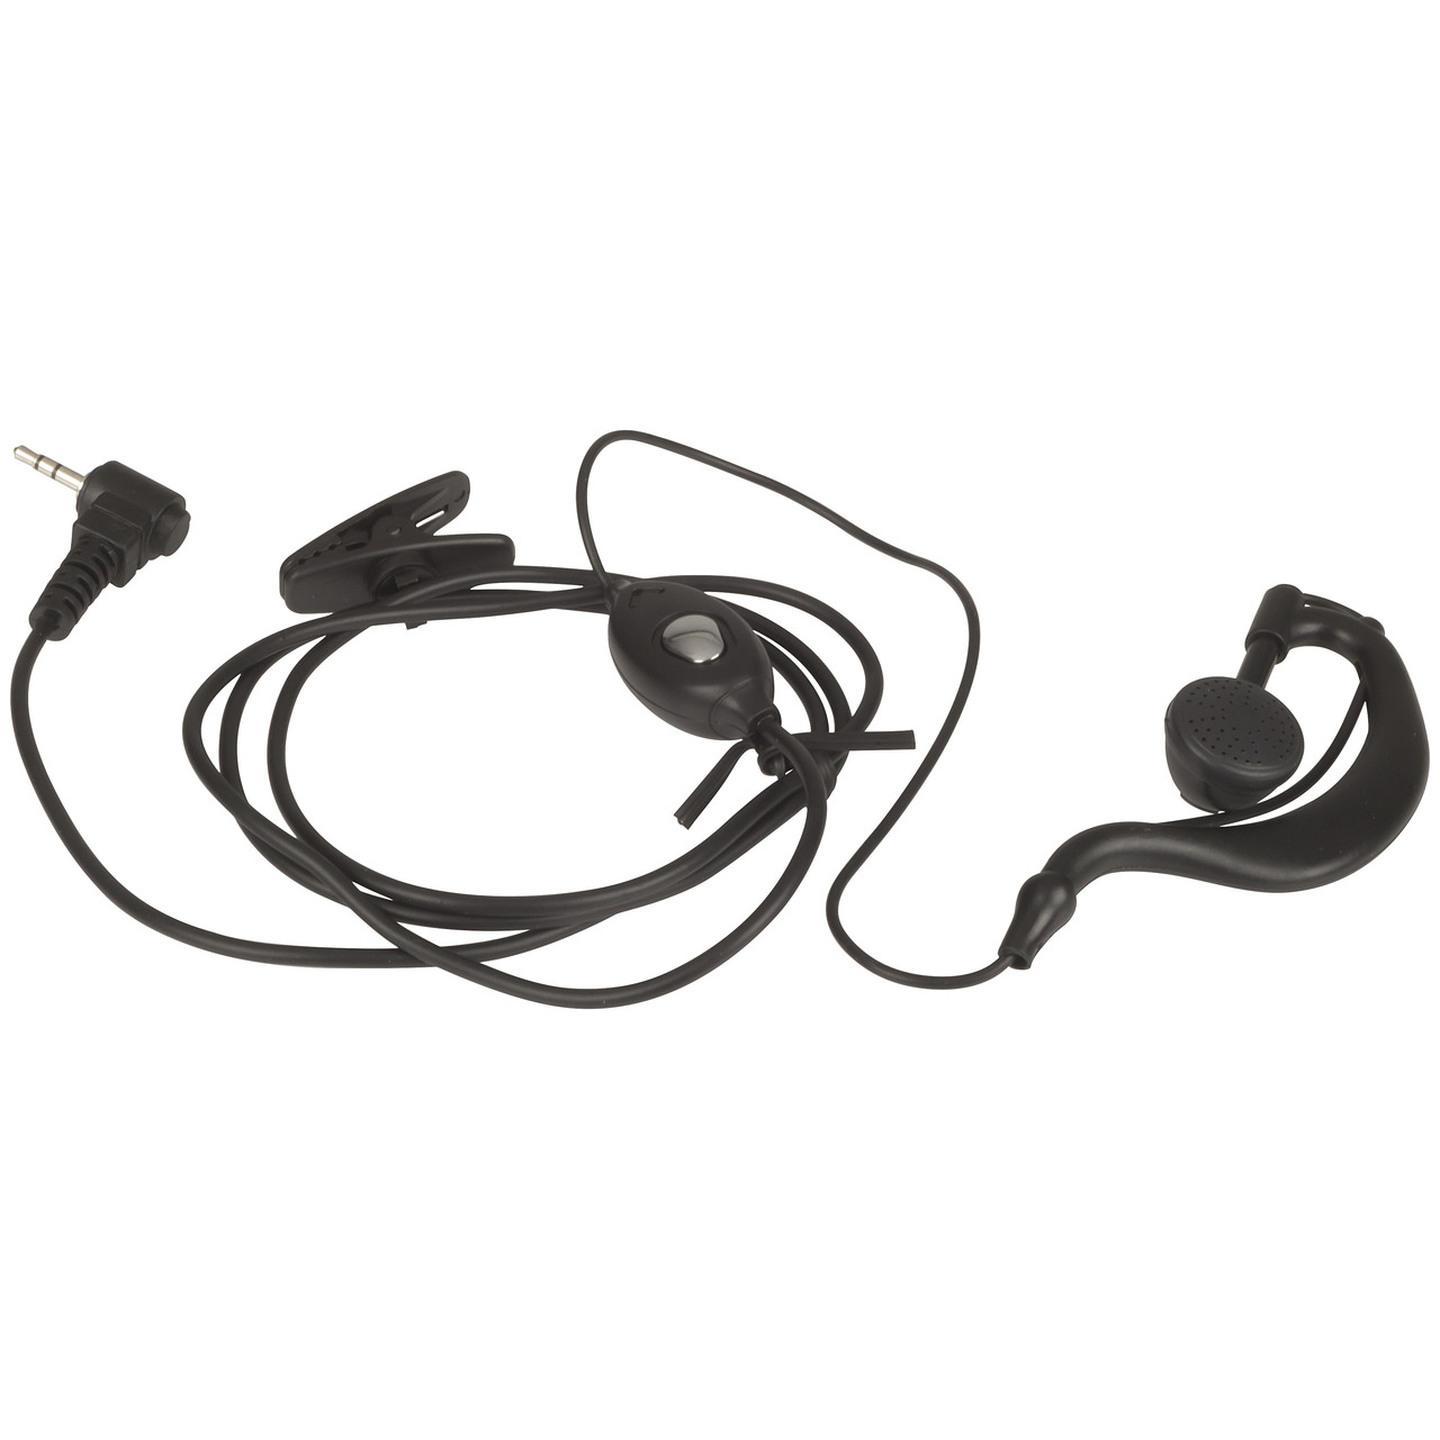 Headset to Suit NEXTECH 0.5W UHF Transceivers